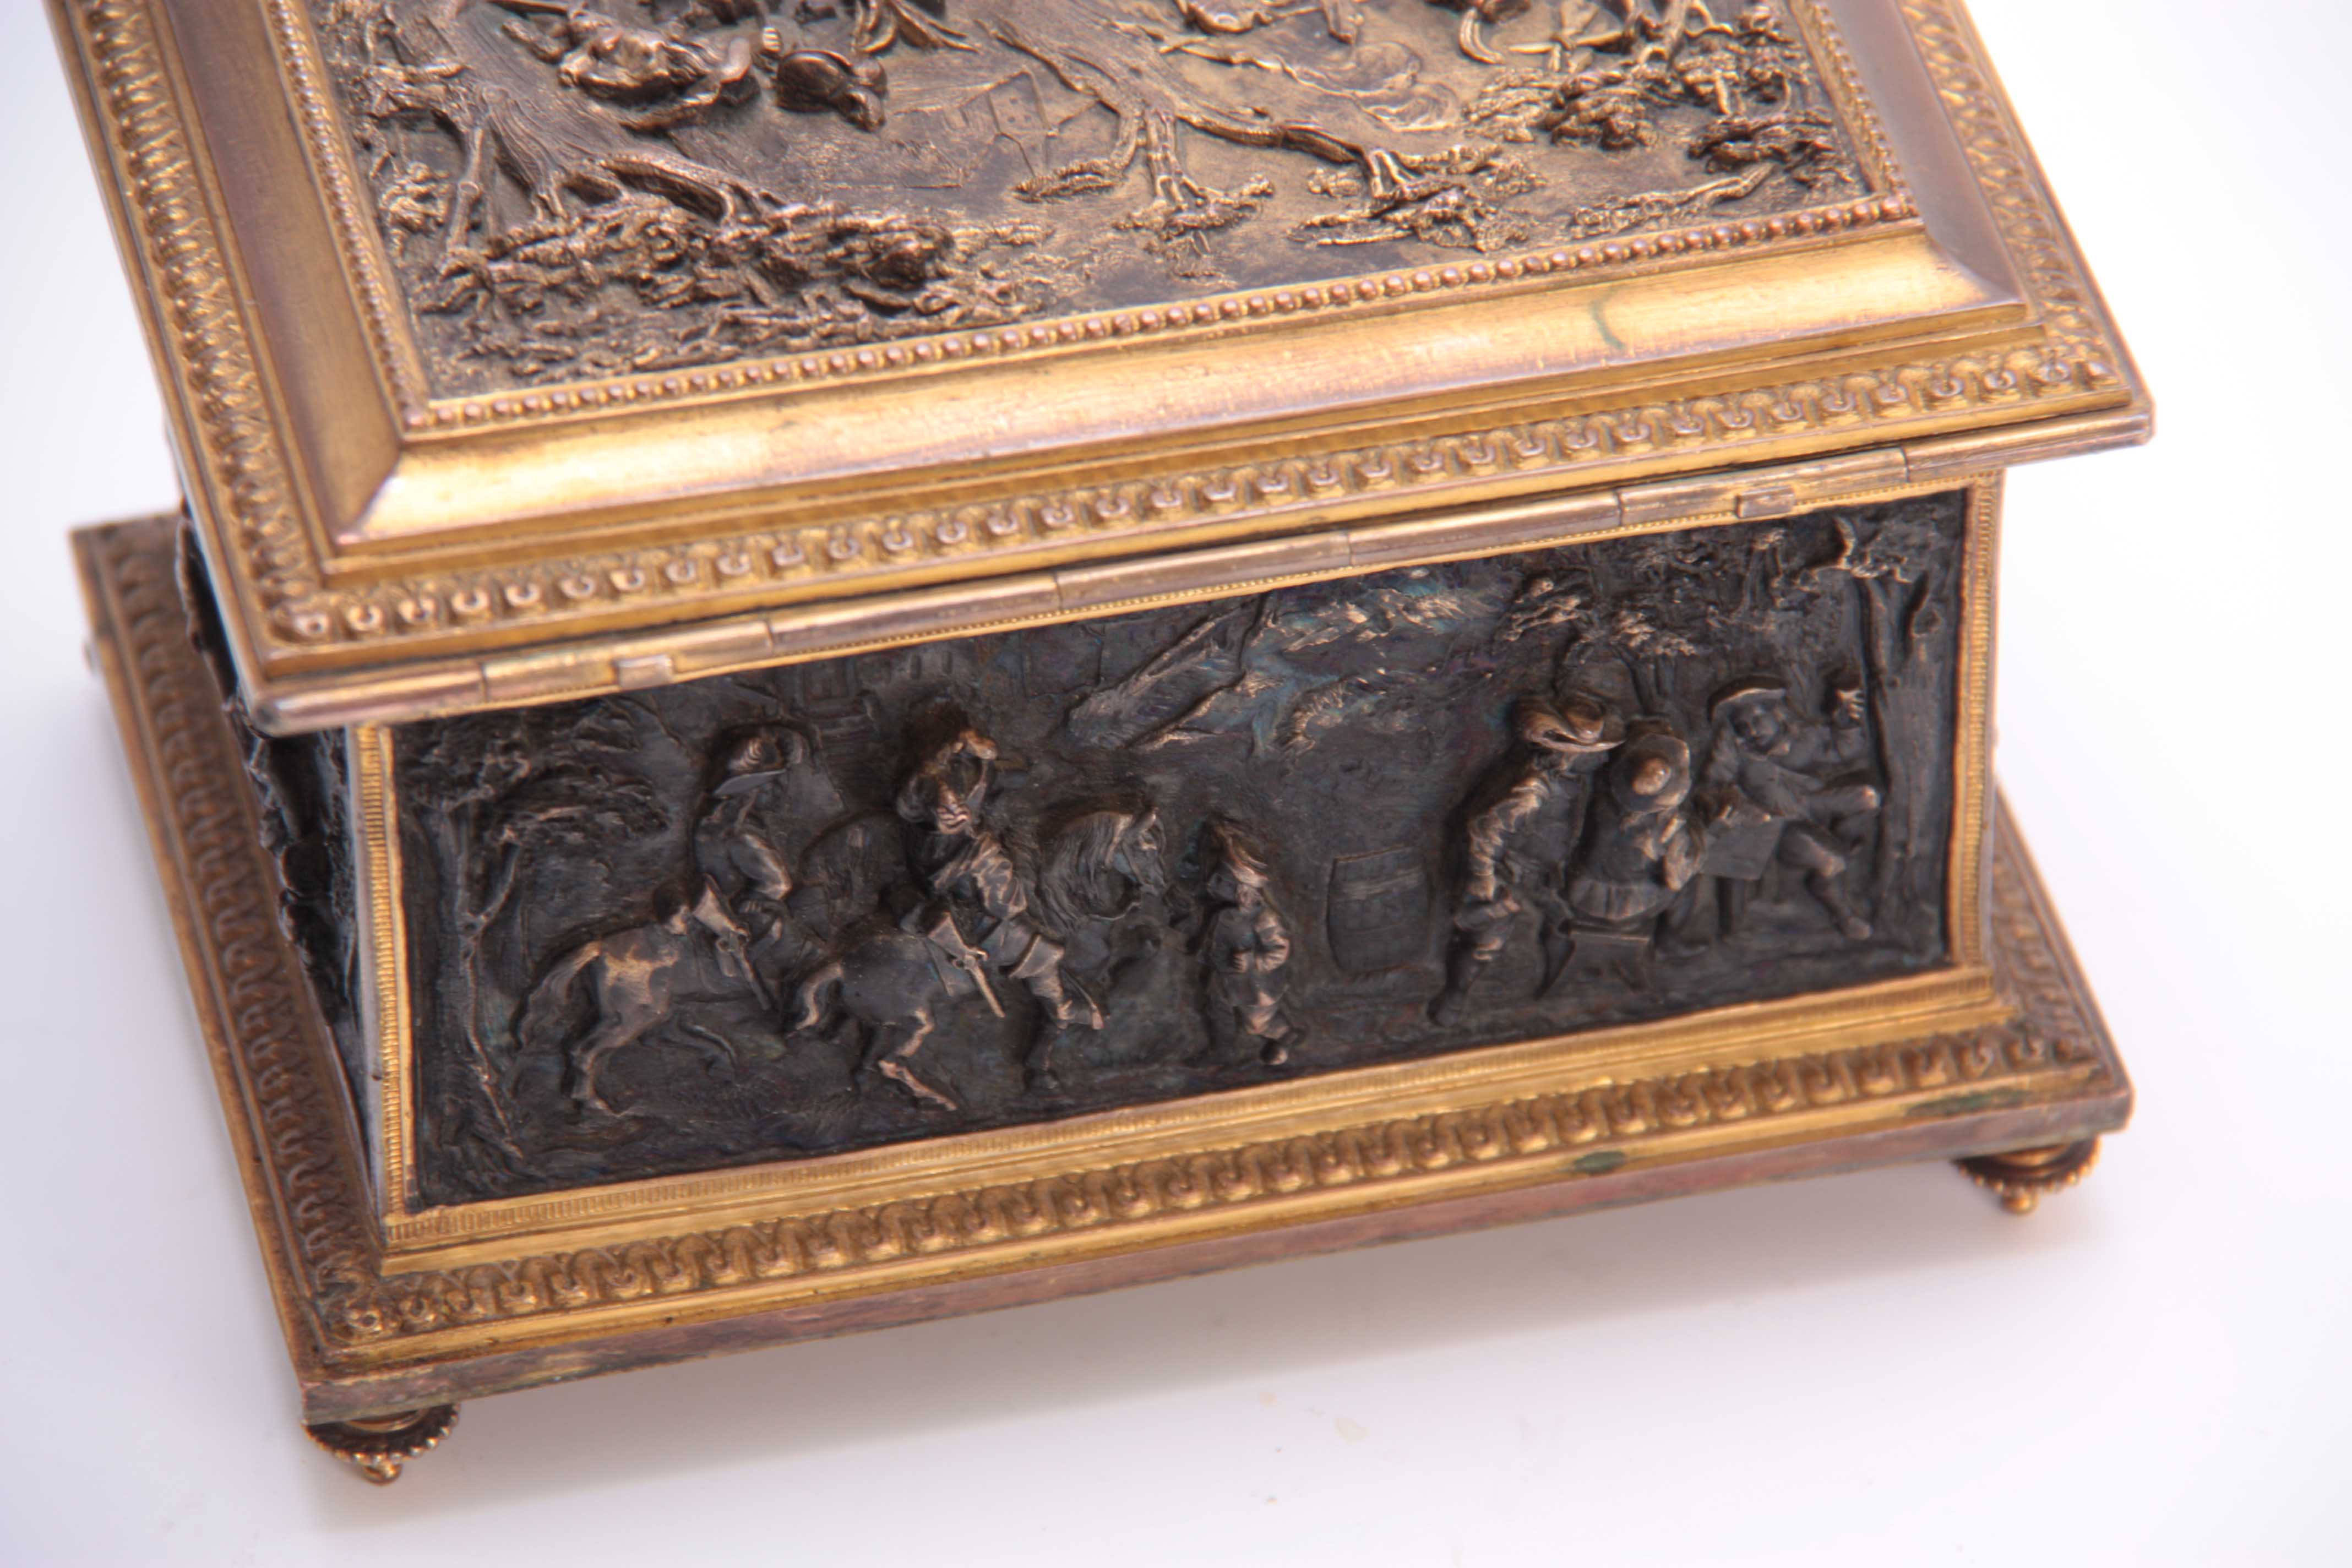 A LATE 19TH CENTURY CONTINENTAL GILT BRASS JEWELLERY CASKET set with cast bronzed figural panels - Image 6 of 9